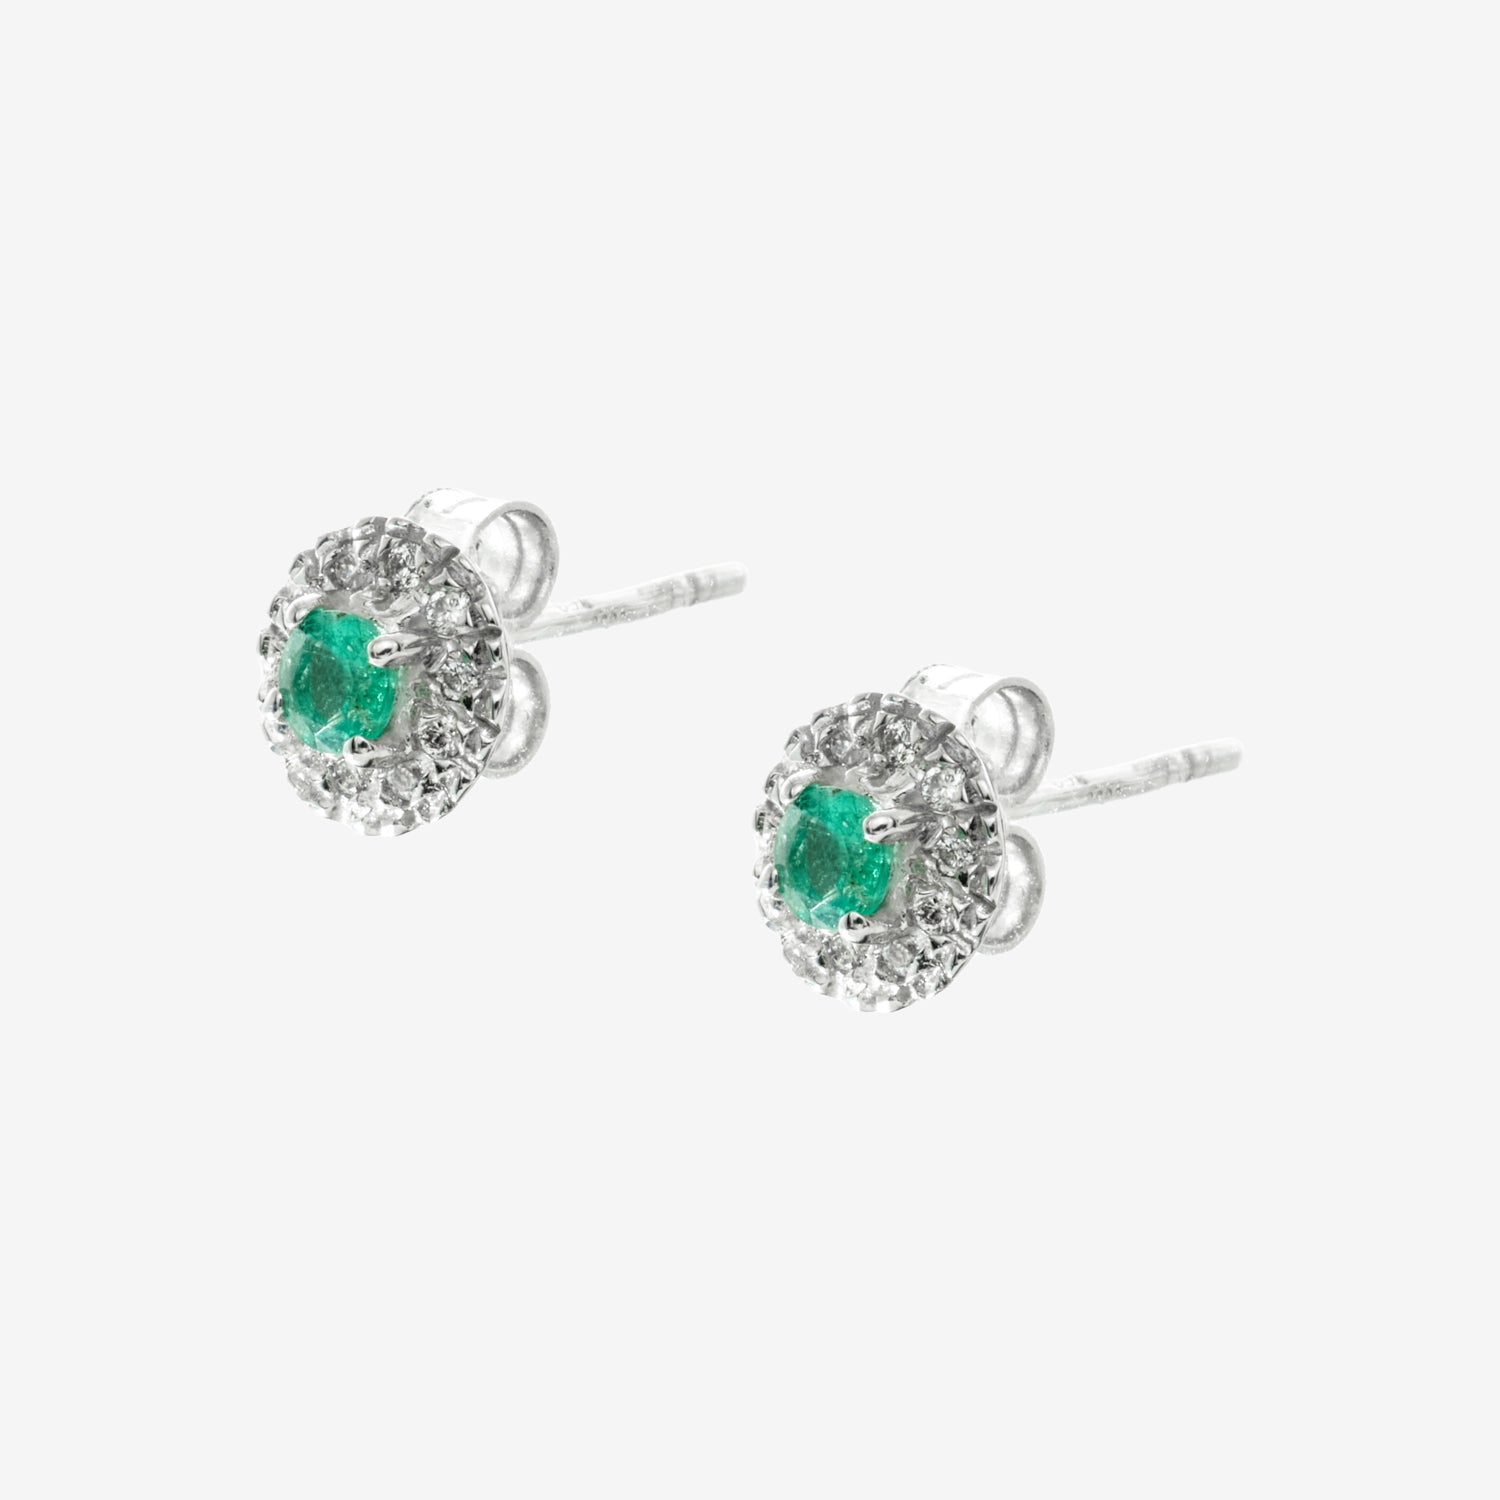 EMERALD DOTS EARRINGS WITH DIAMONDS AND EMERALDS